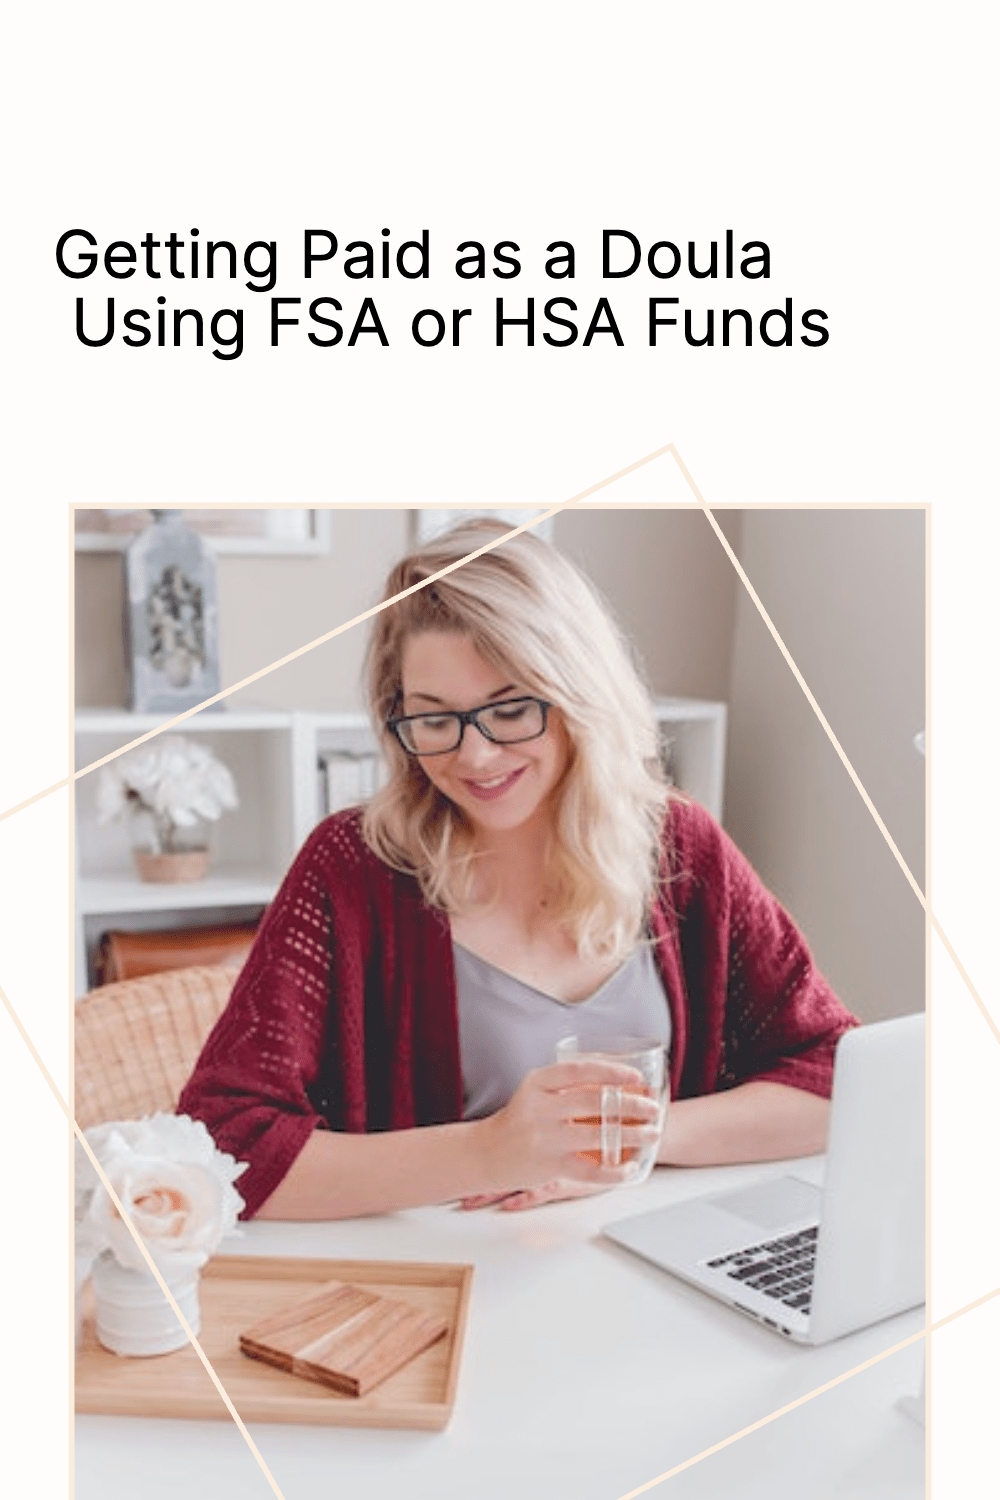 Doula payment options: FSA or HSA funds.